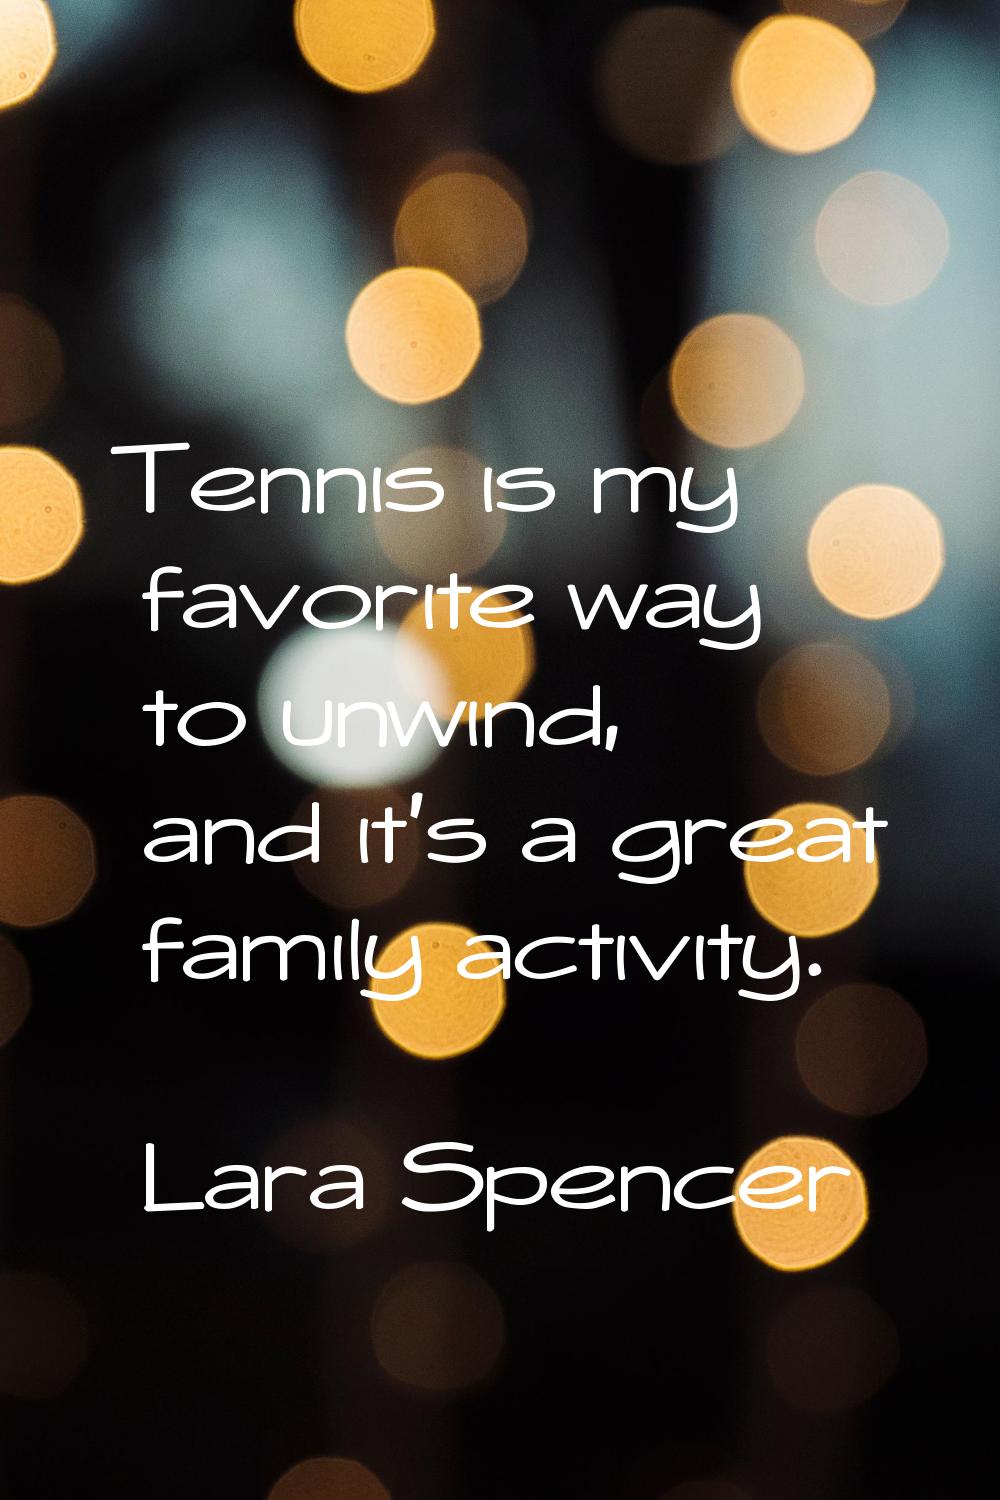 Tennis is my favorite way to unwind, and it's a great family activity.